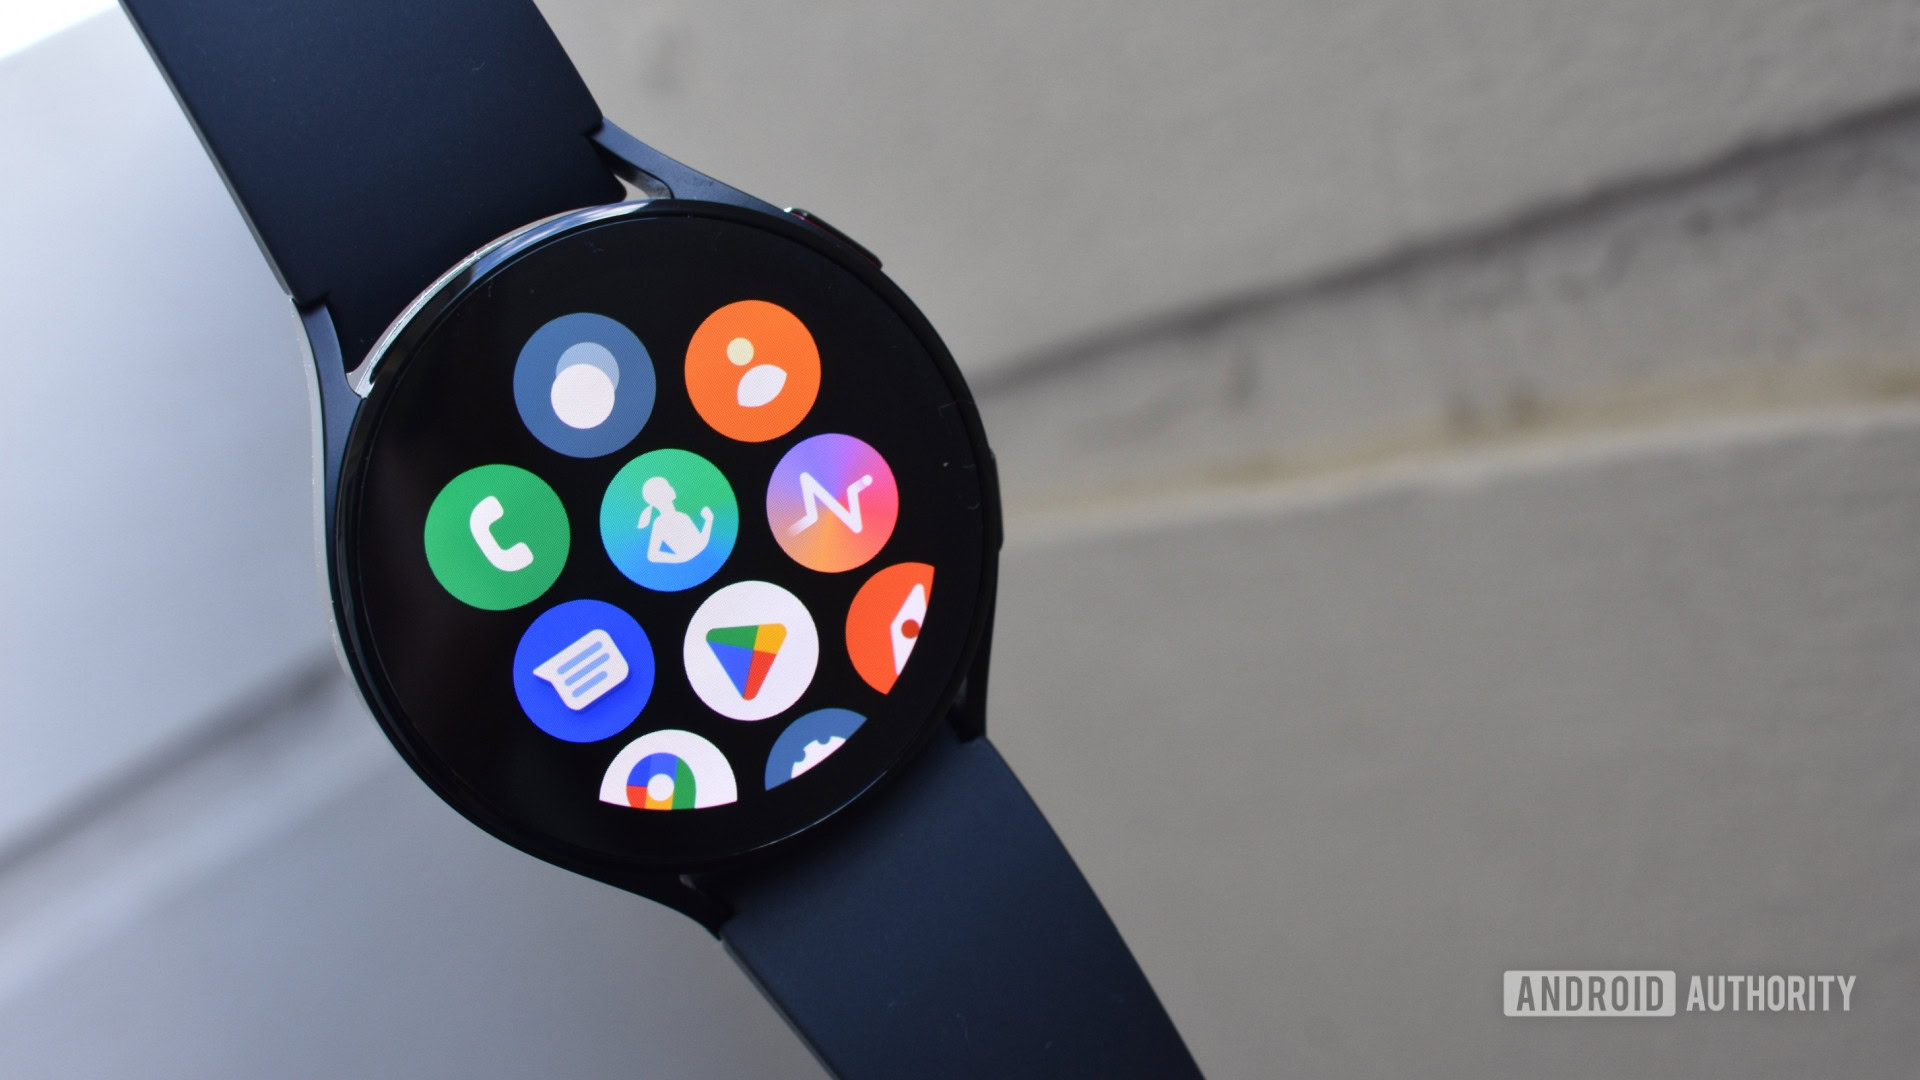 Samsung Galaxy Watch 4 Classic Review: High on features, low on